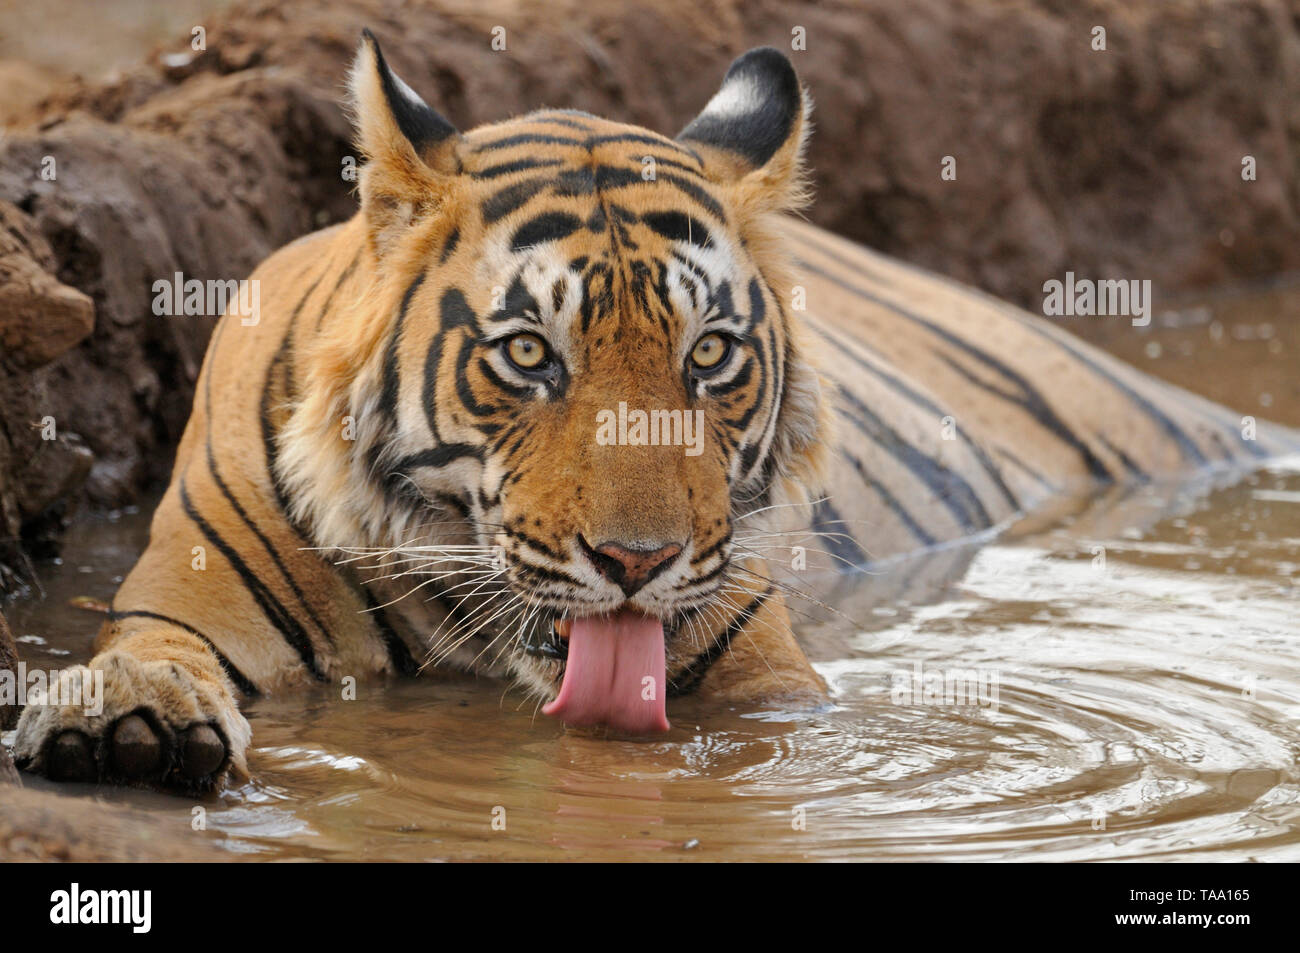 Tiger sitting in water hole, Ranthambore national park, India, Asia Stock Photo